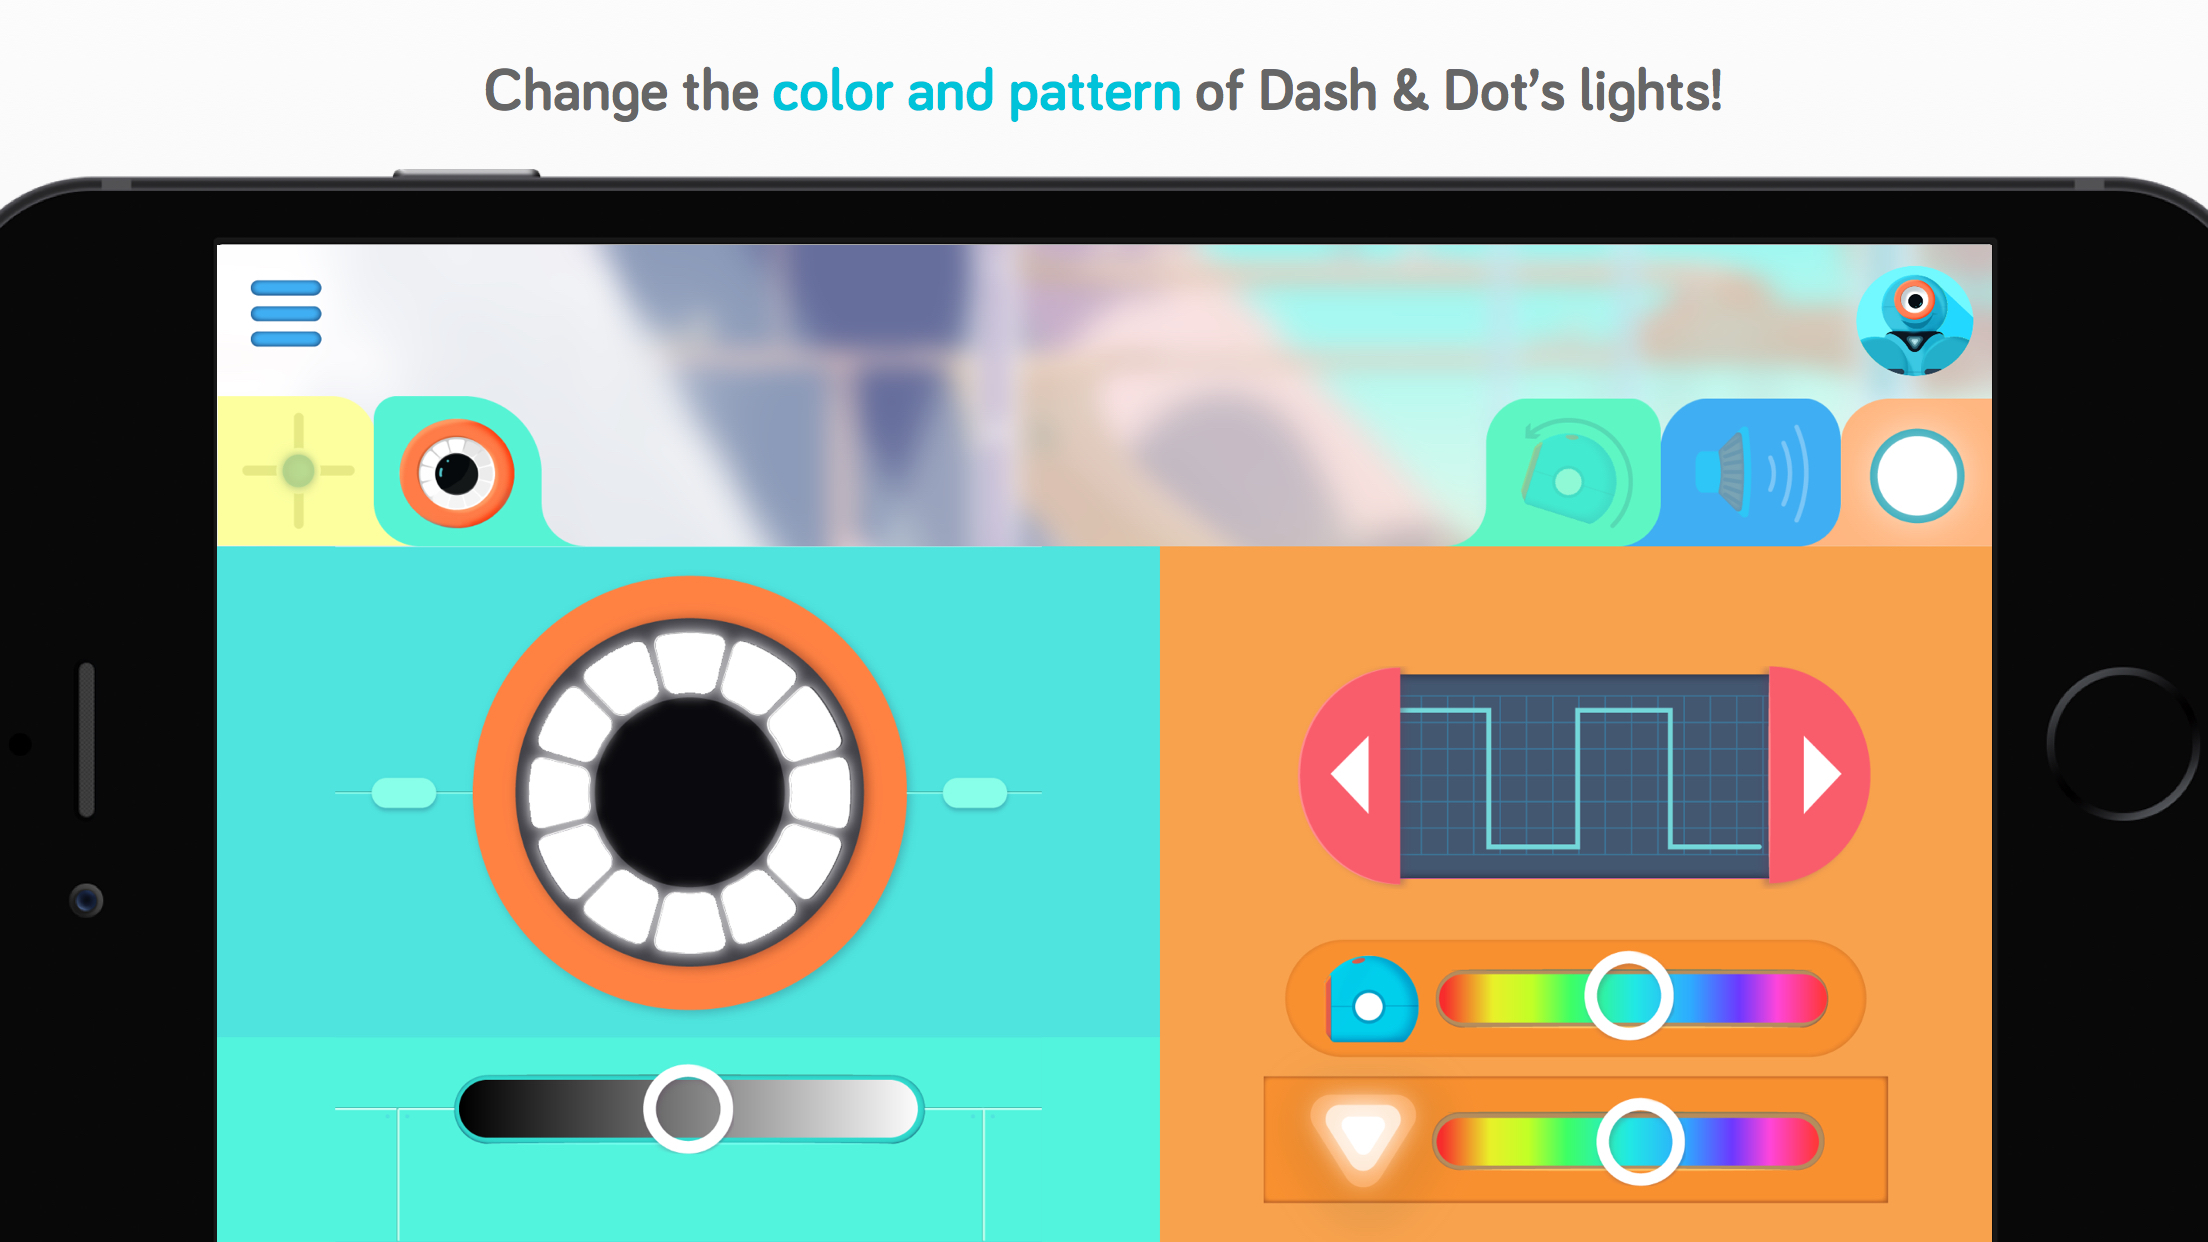 Go for Dash & Dot robots - for iPhone